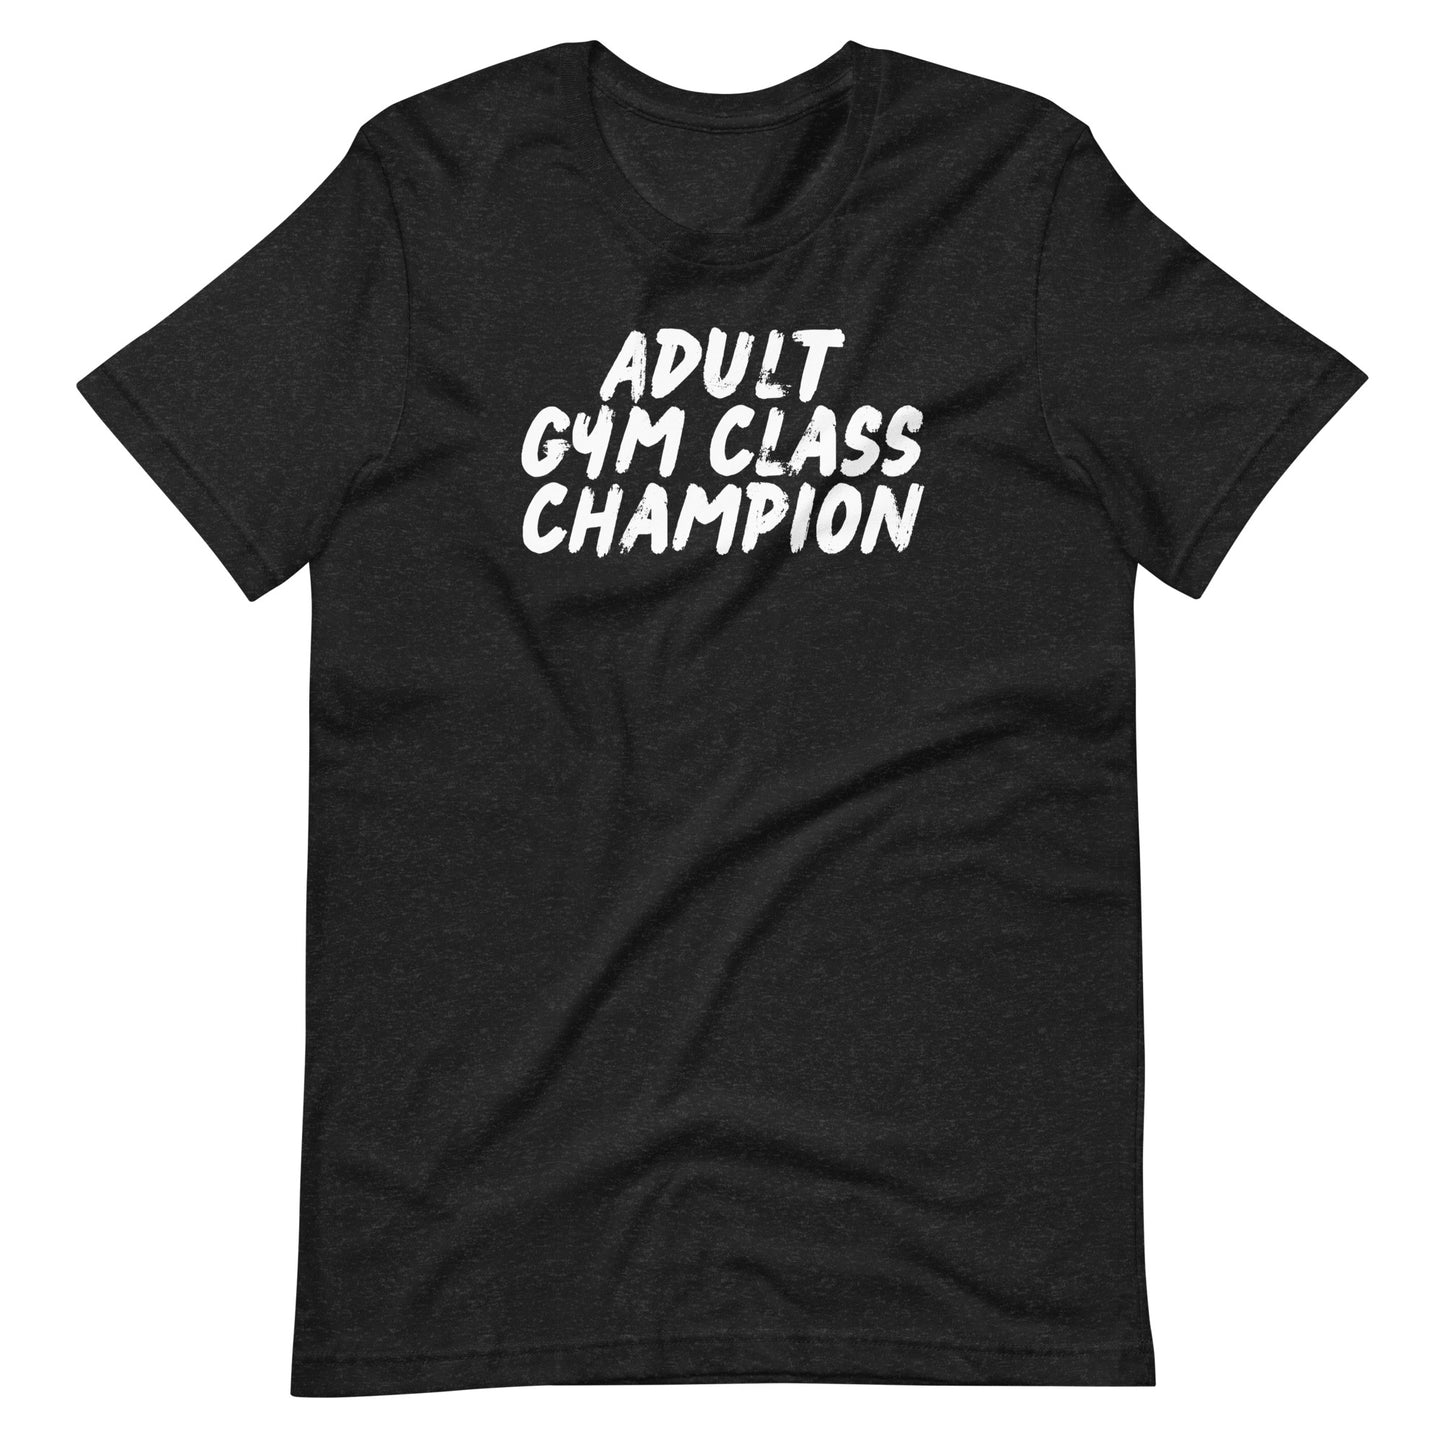 Adult Gym Class Champion Crossfit Workout Shirt, Crossfit Gifts, Crossfit Coach Gift, Unisex